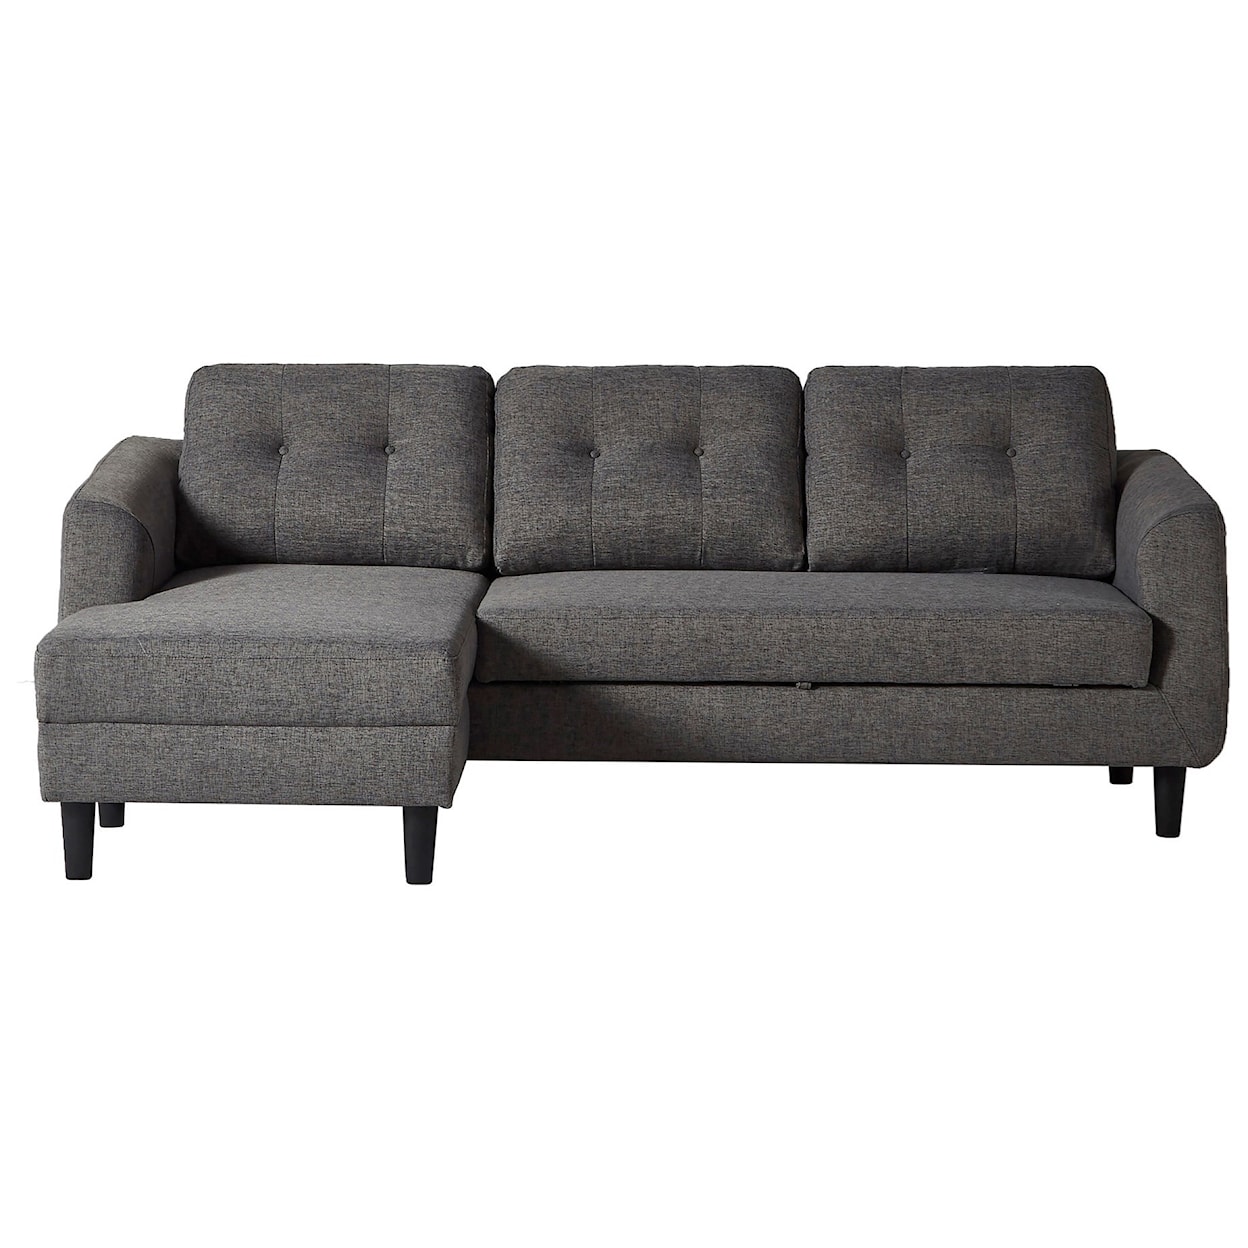 Moe's Home Collection Belagio Sofa Bed with Chaise